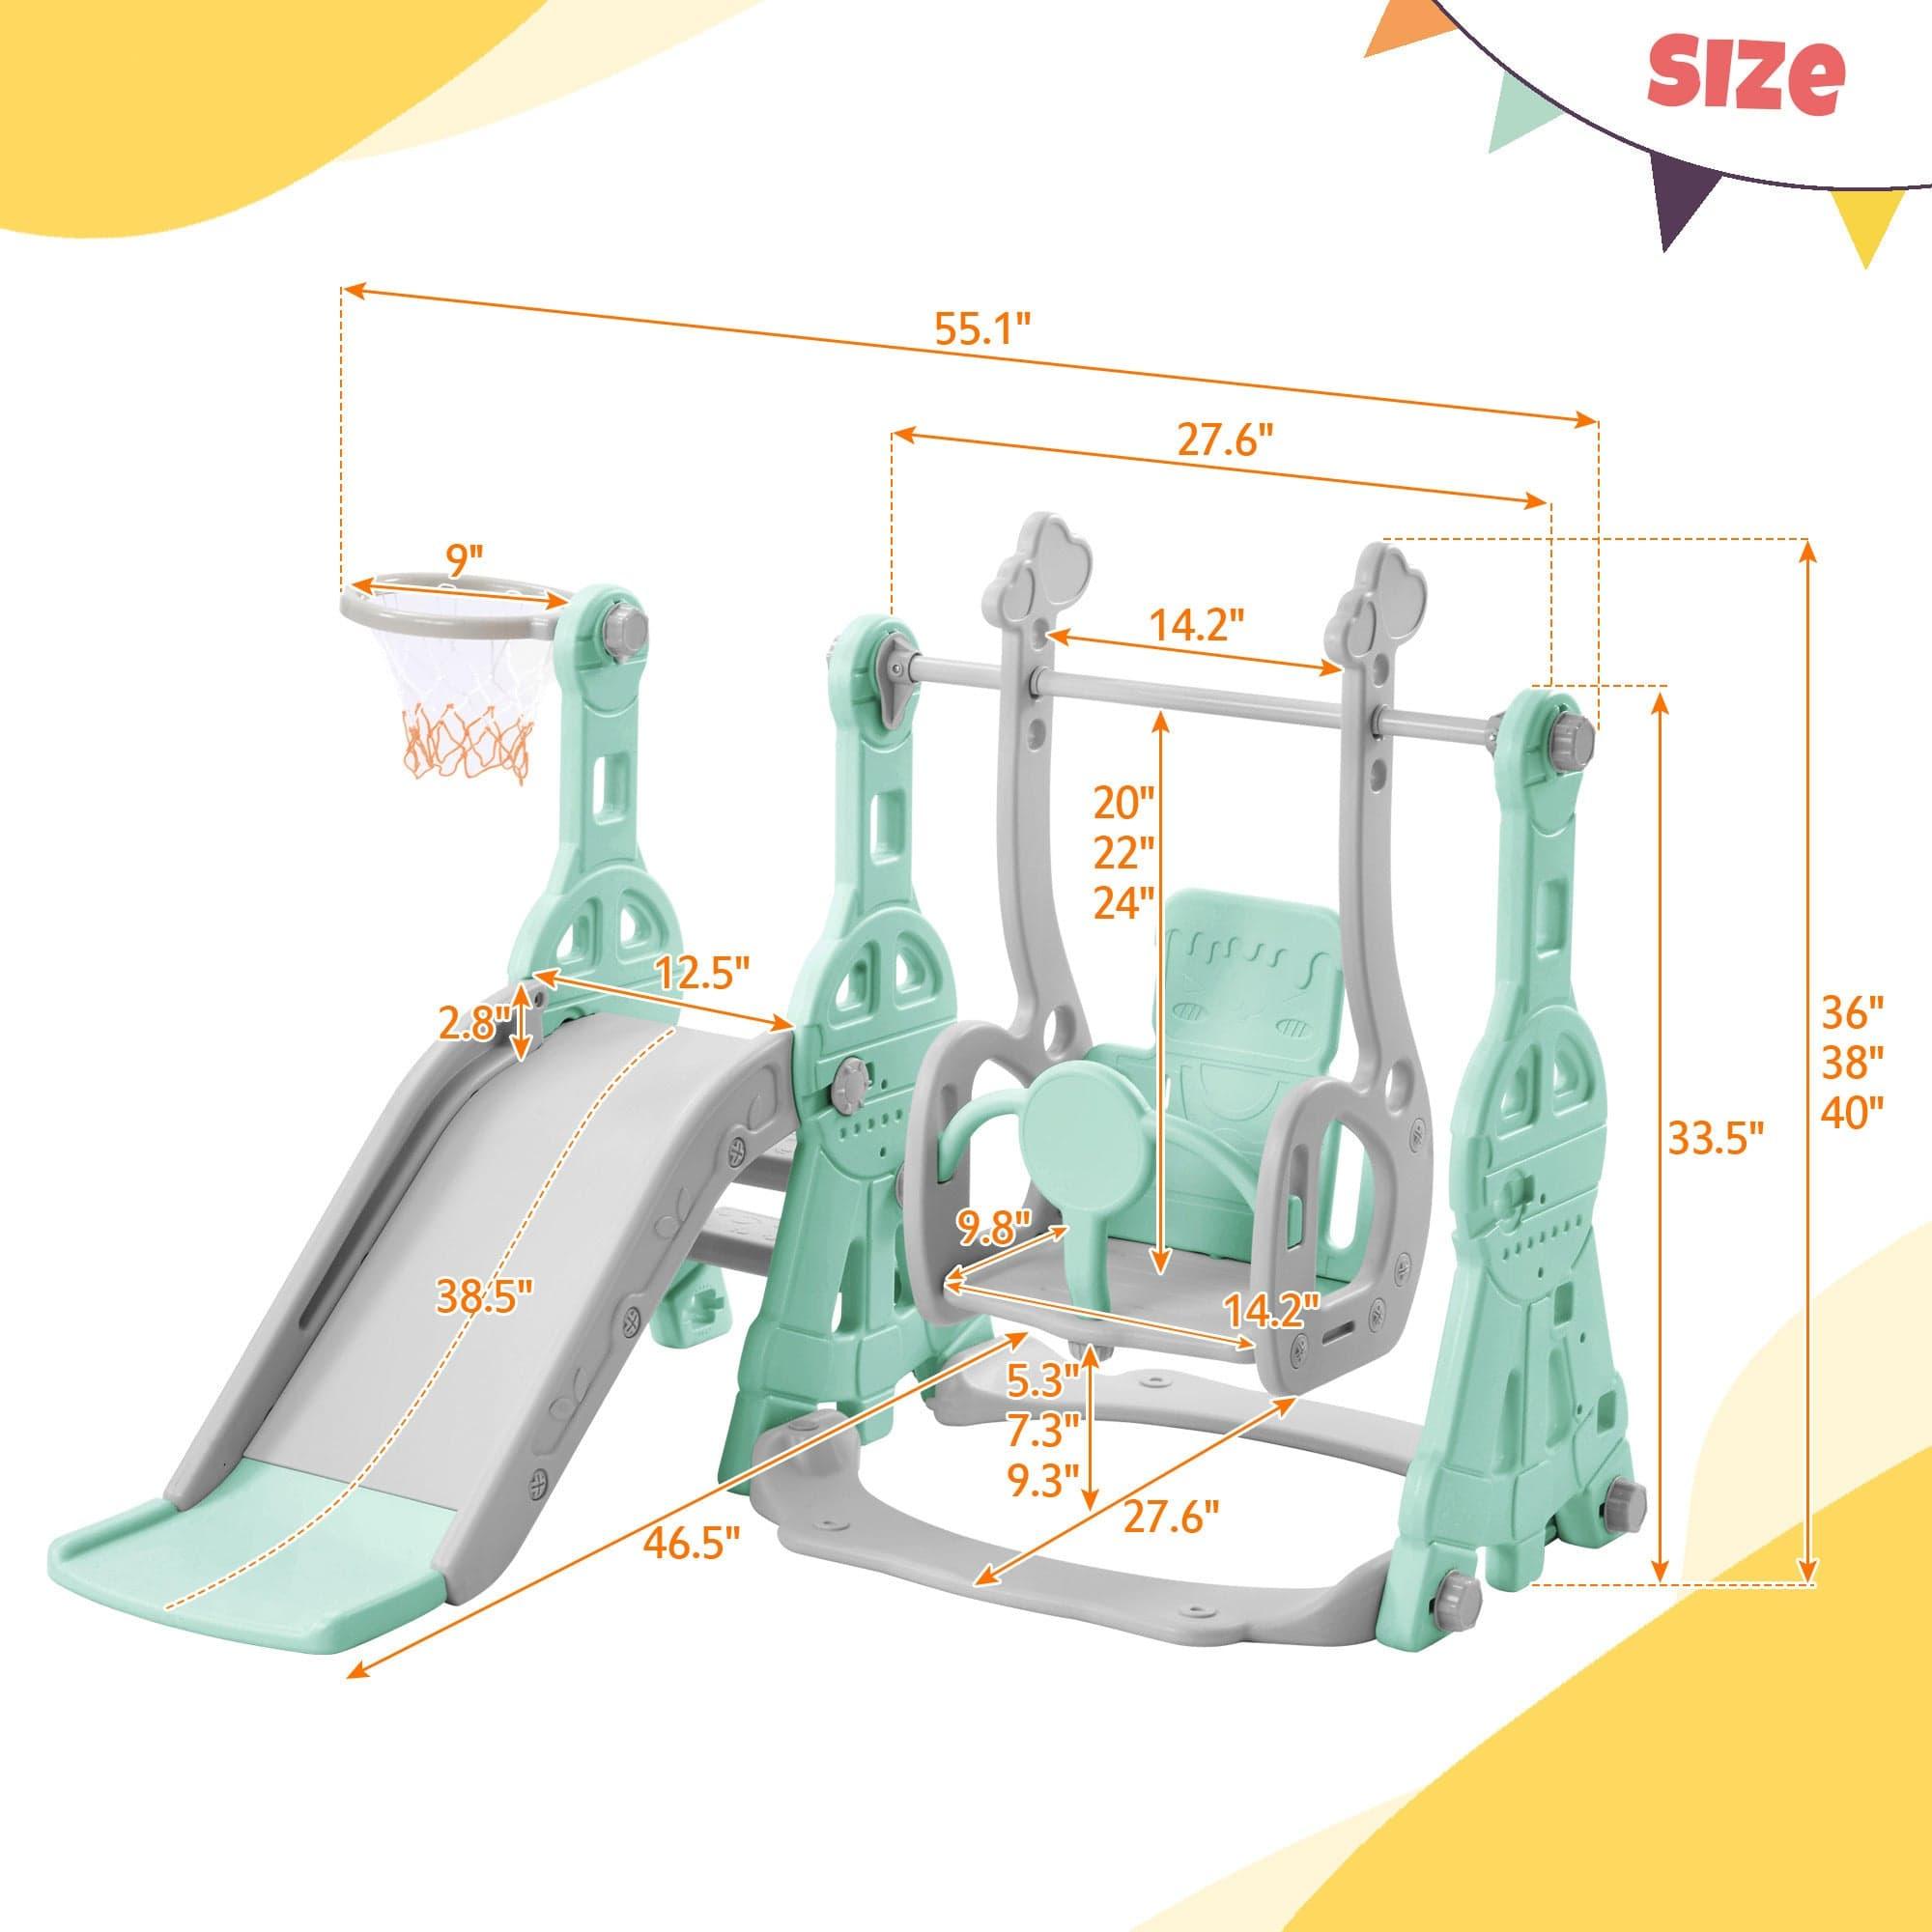 Shop Toddler Slide and Swing Set 3 in 1, Kids Playground Climber Swing Playset with Basketball Hoops Freestanding Combination Indoor & Outdoor Mademoiselle Home Decor